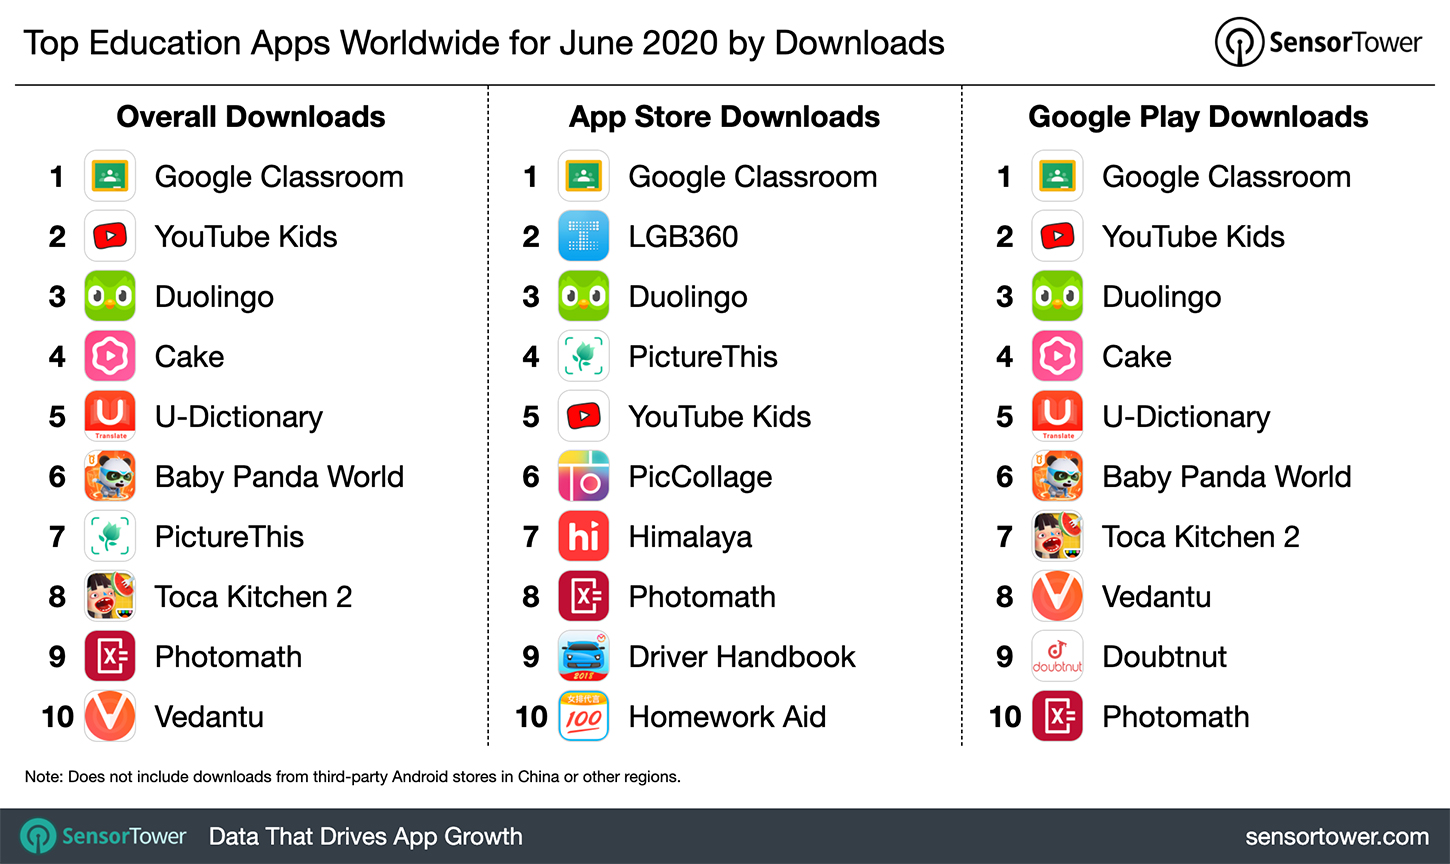 Top Education Apps Worldwide for June 2020 by Downloads